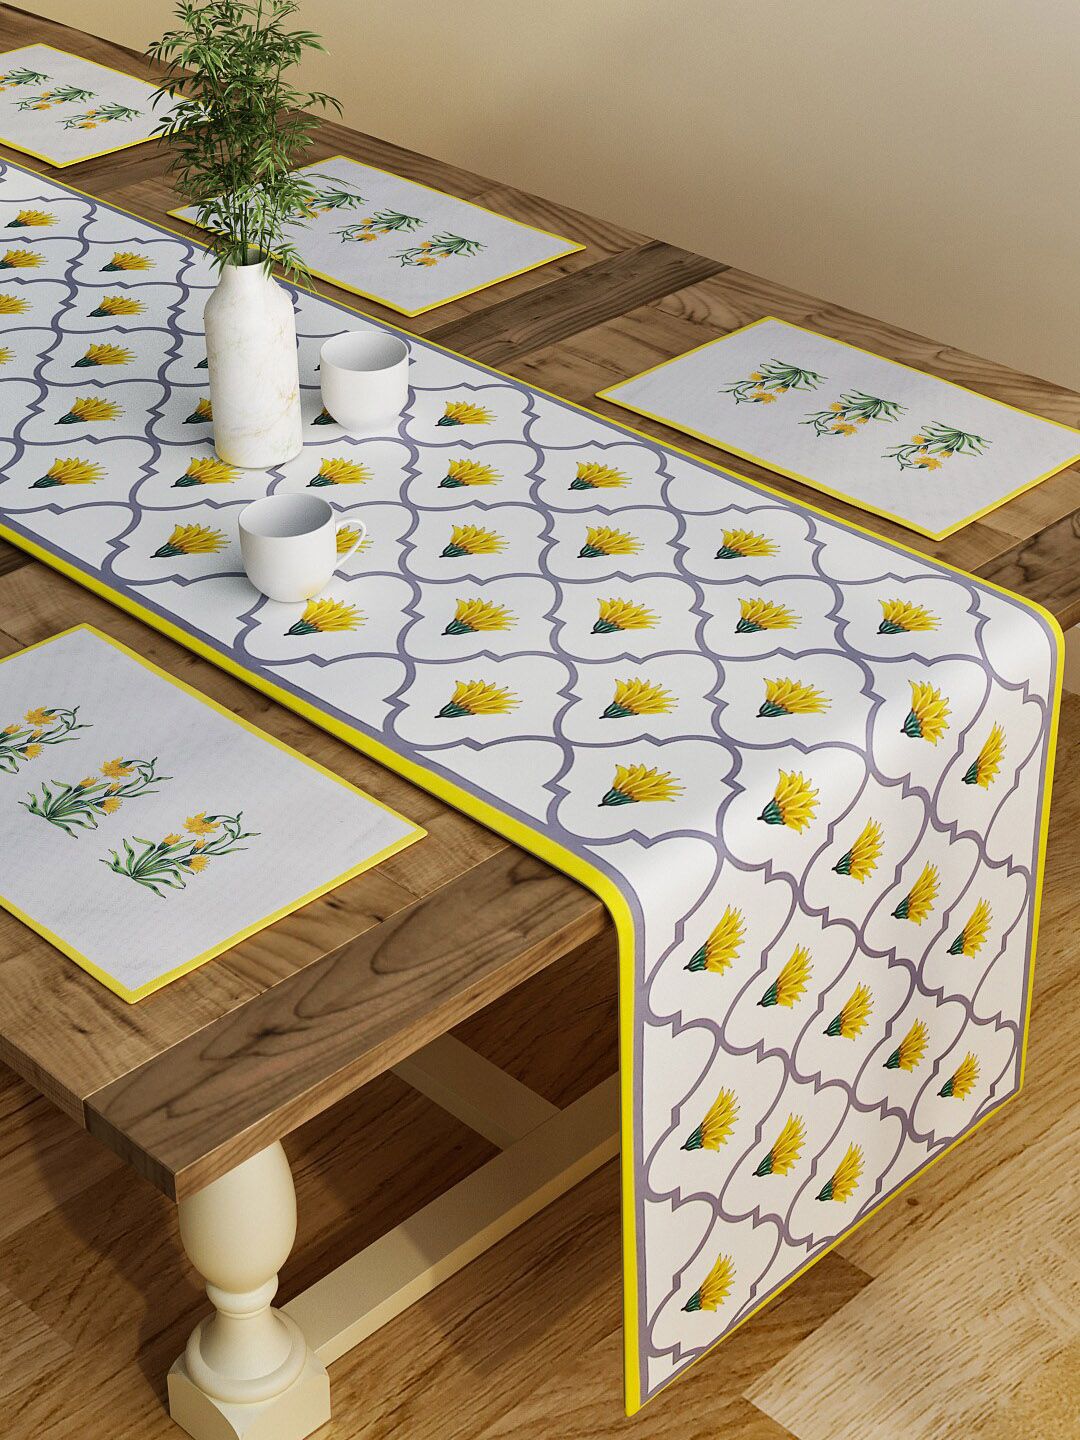 SEJ by Nisha Gupta White & Mustard Set of 7 Table Placemats & Runner Price in India